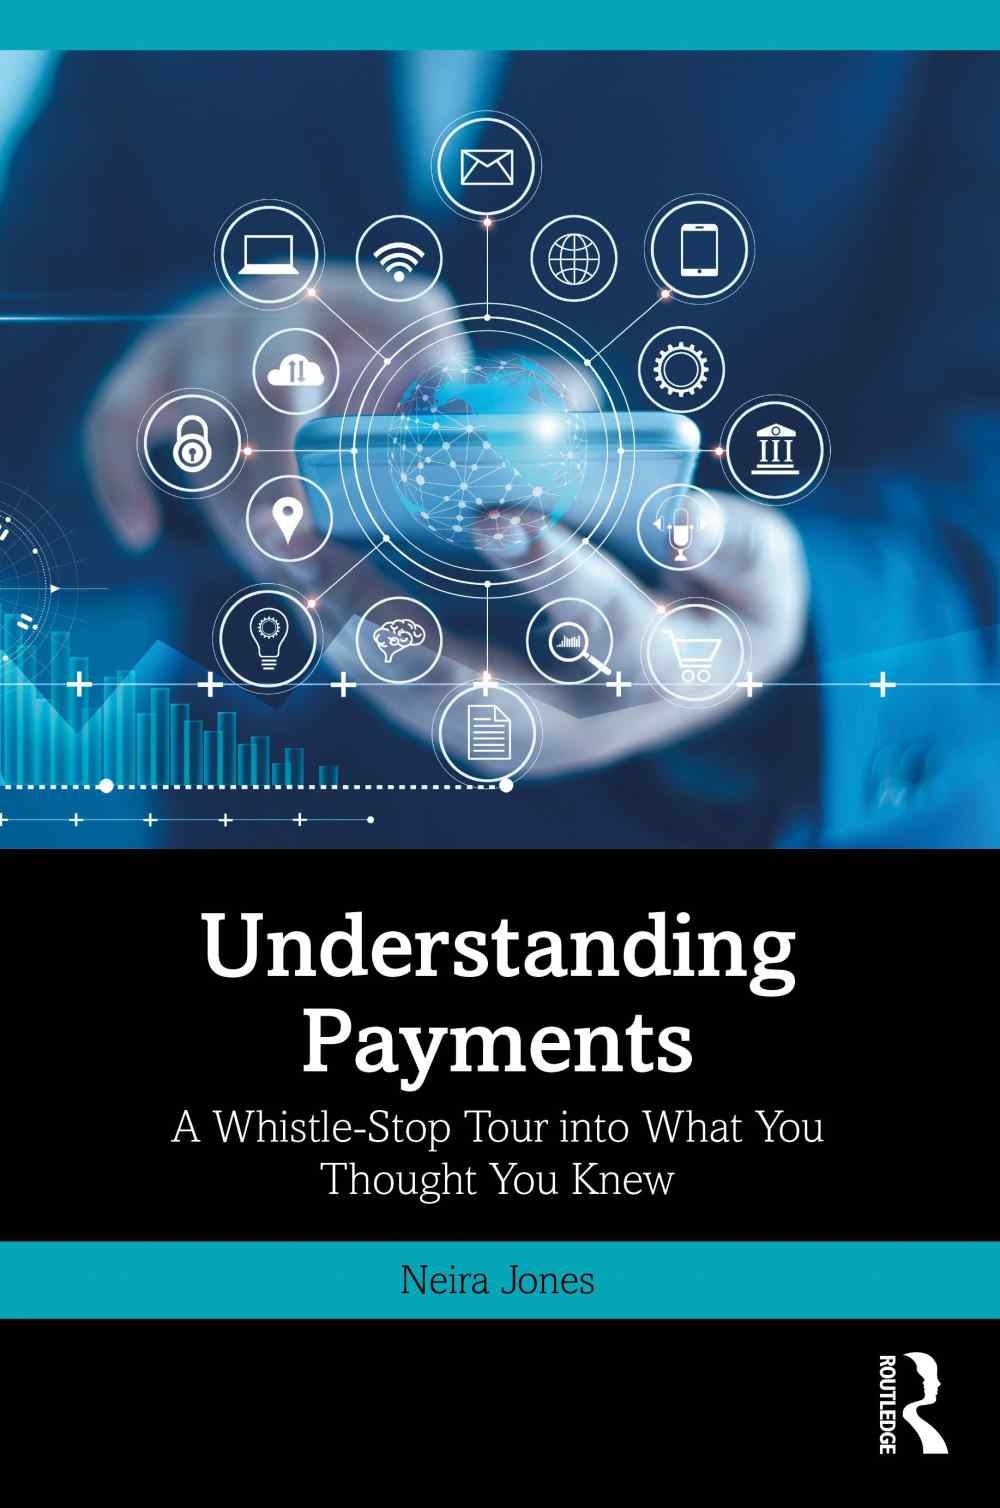 Understanding Payments: A Whistle-Stop Tour Into What You Thought You Knew